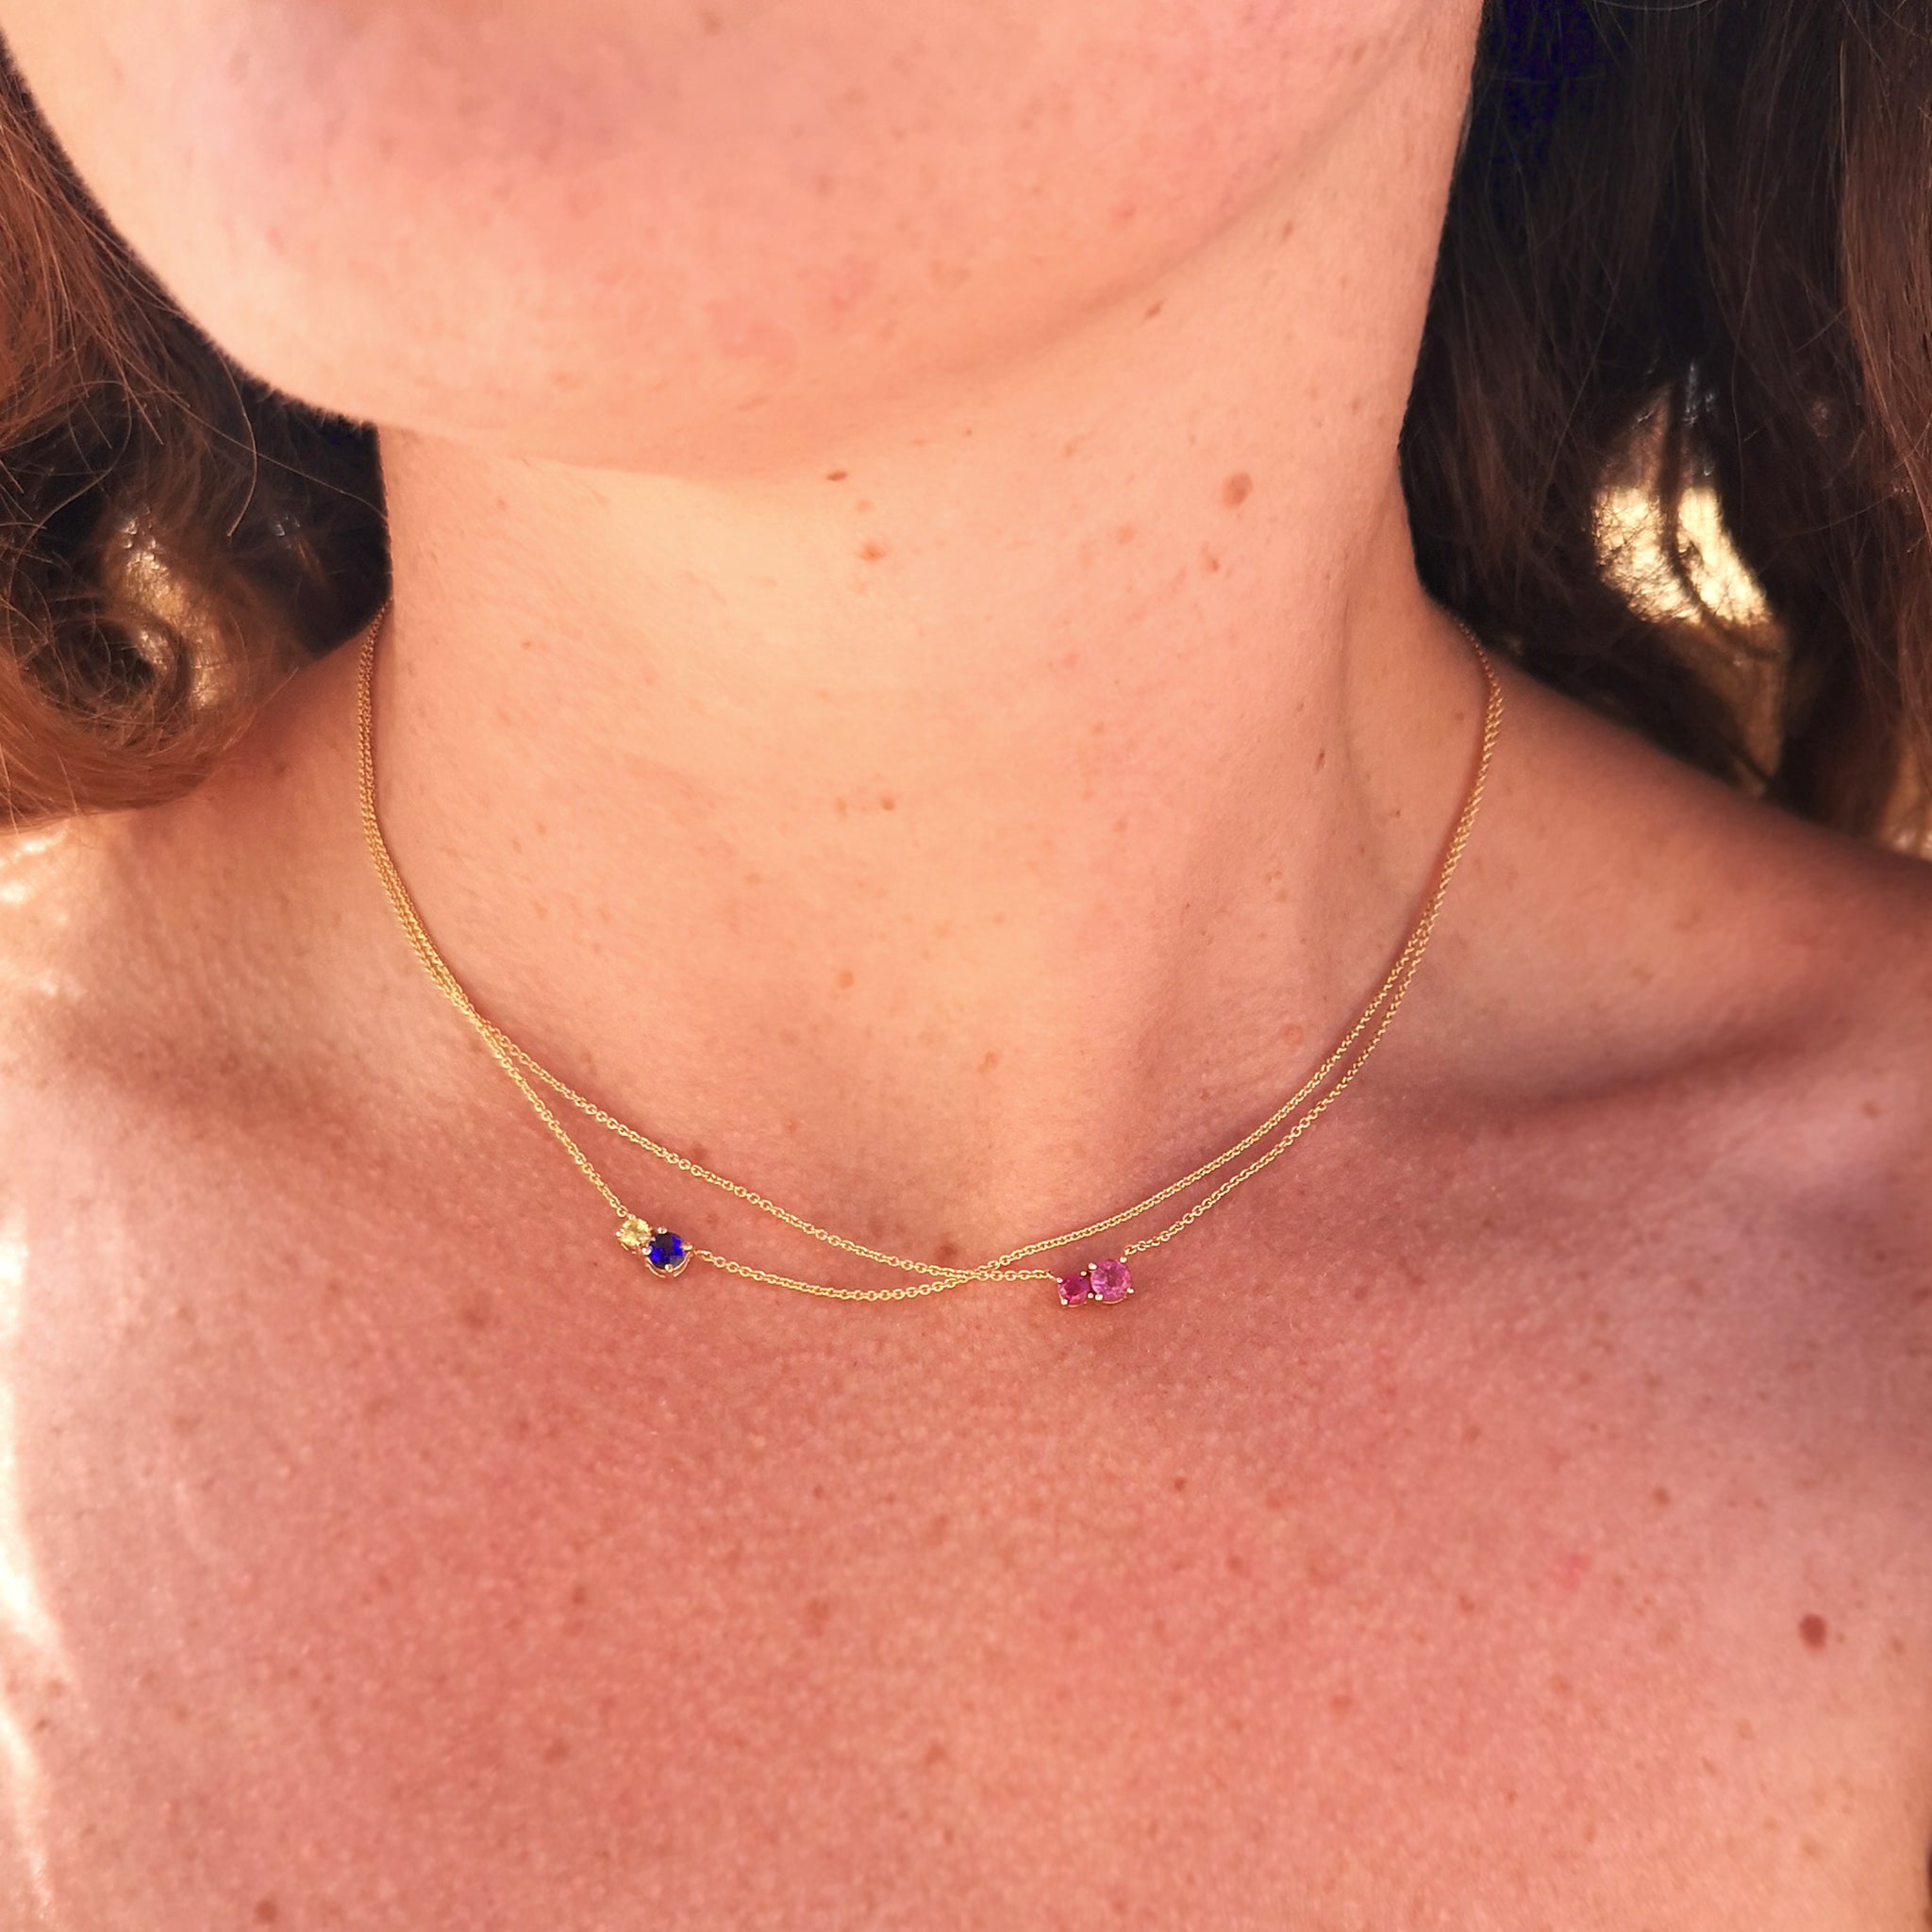 A woman's neck with the Royal Mimosa necklace on a thin chain, paired with another 2 stone necklace by Lico Jewelry.